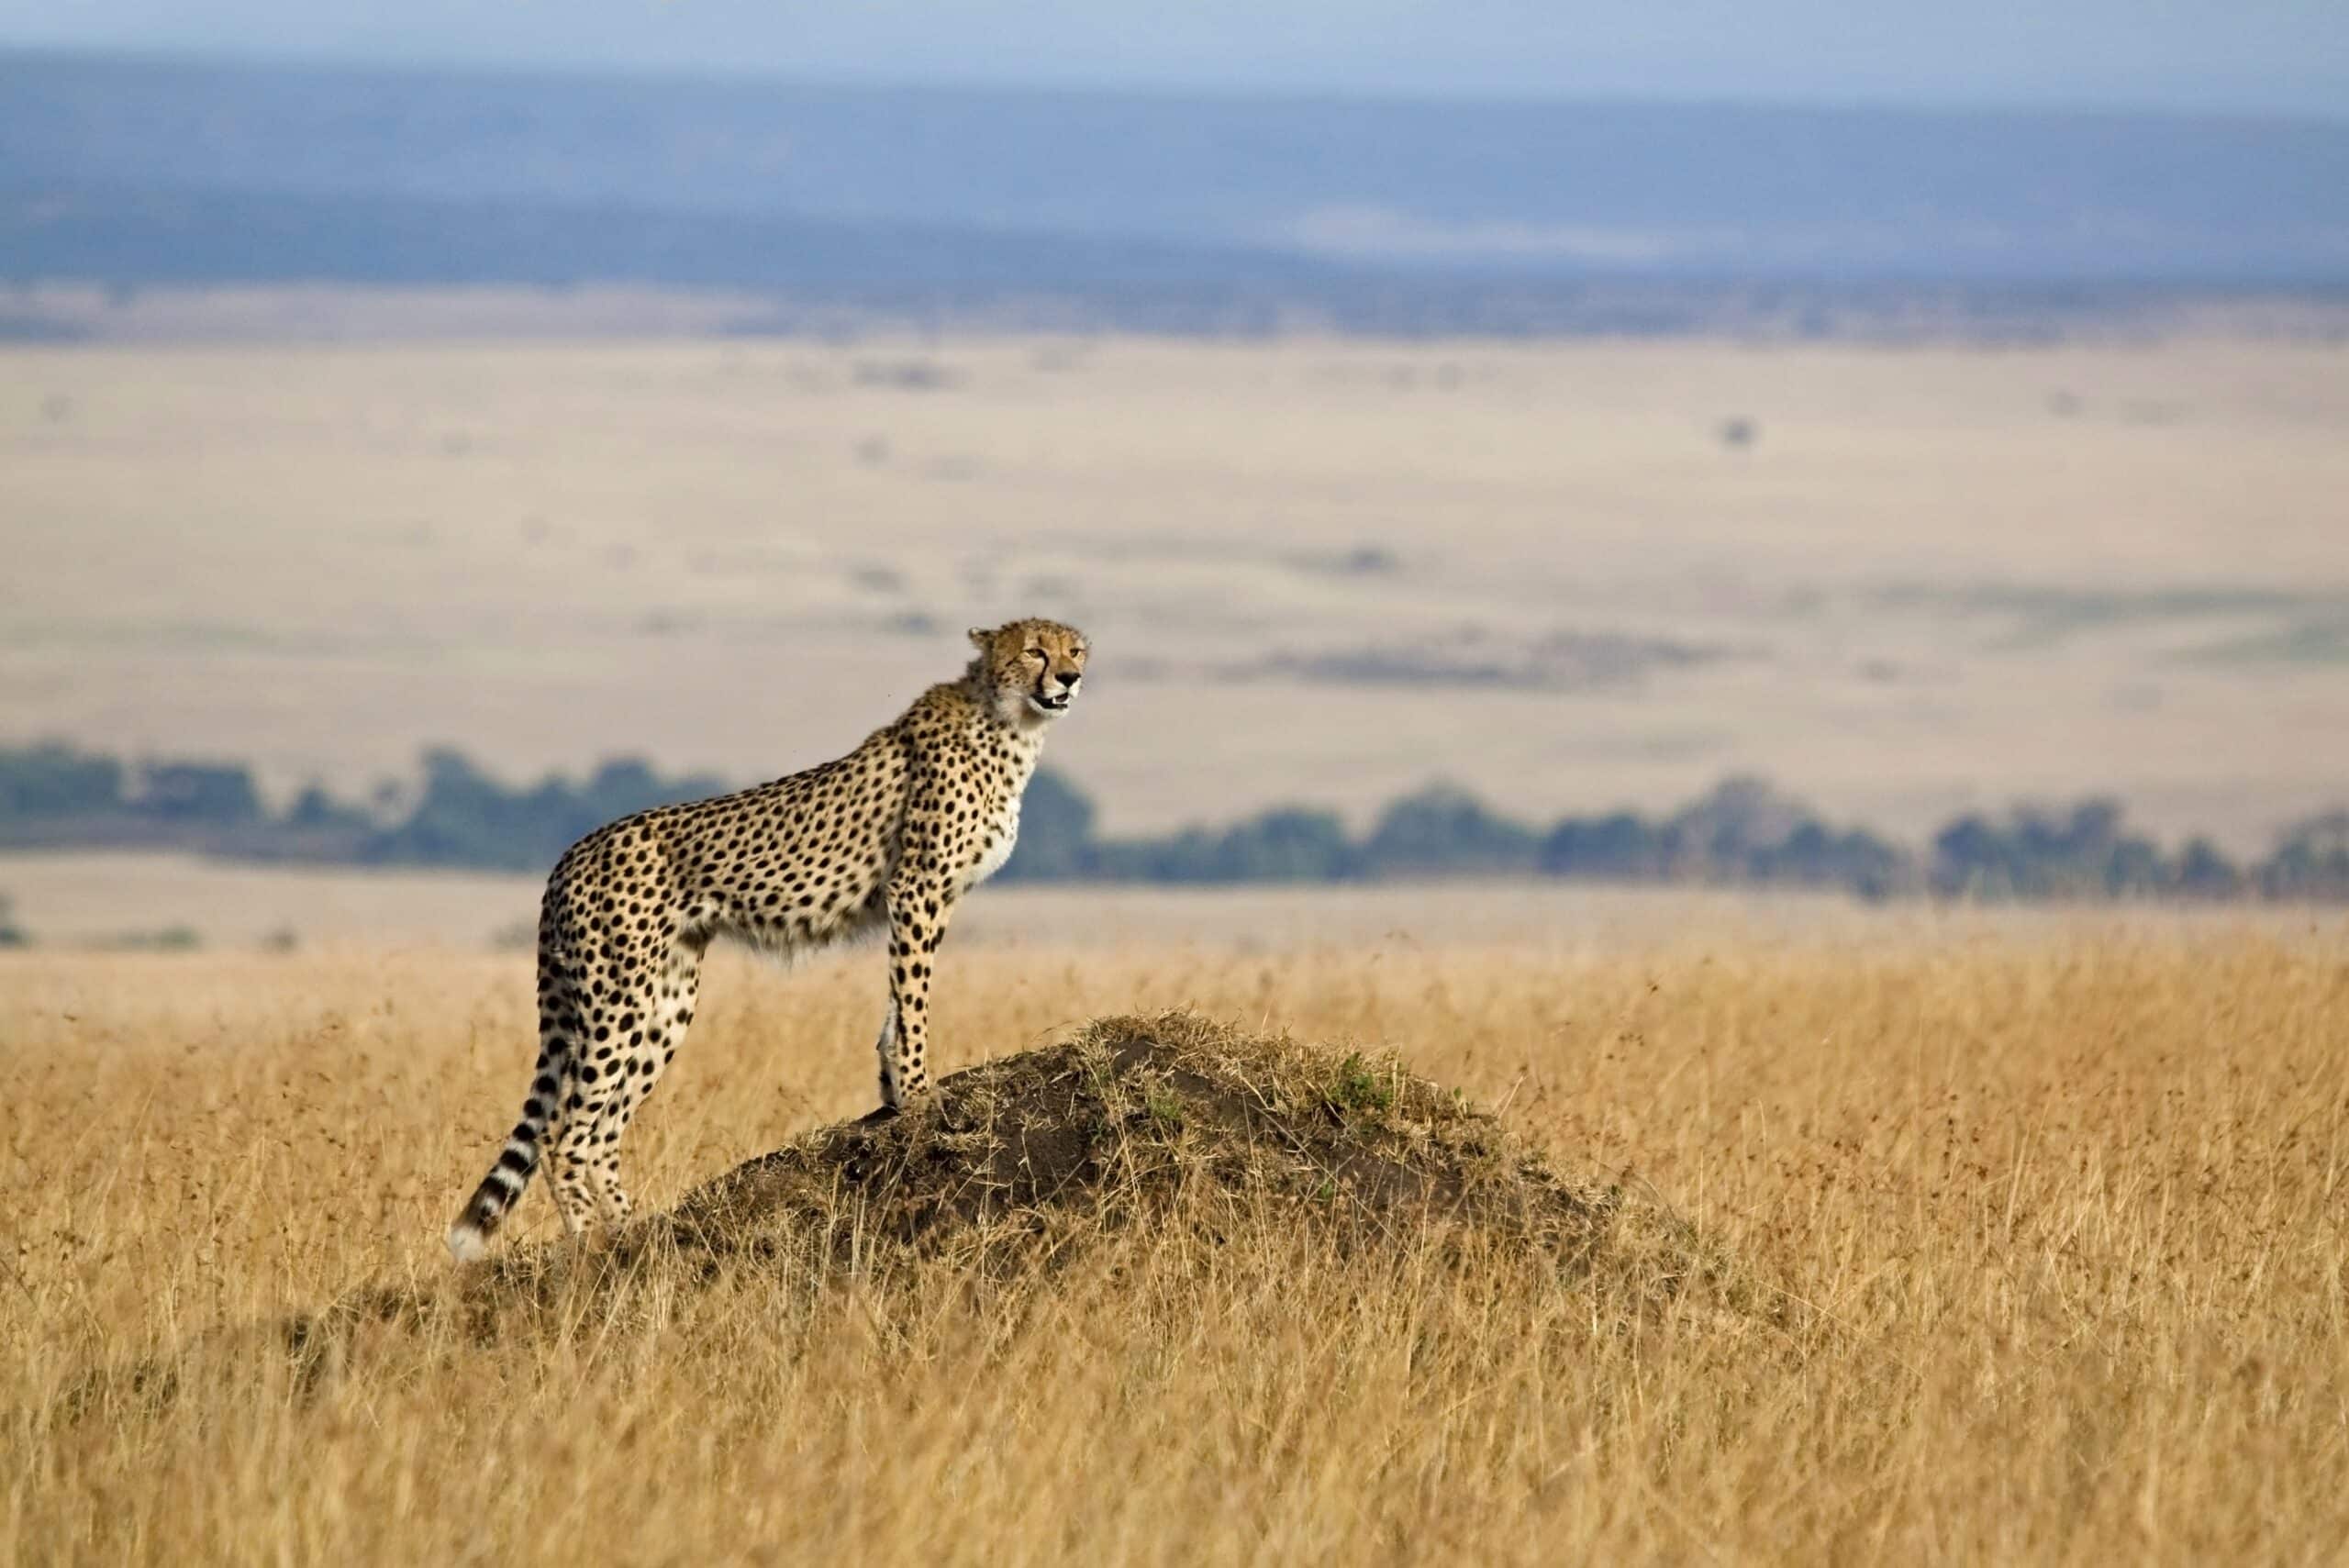 Lone cheetah looking out over the open savannah in nice evening light - Masai Mara national reserve, Kenya